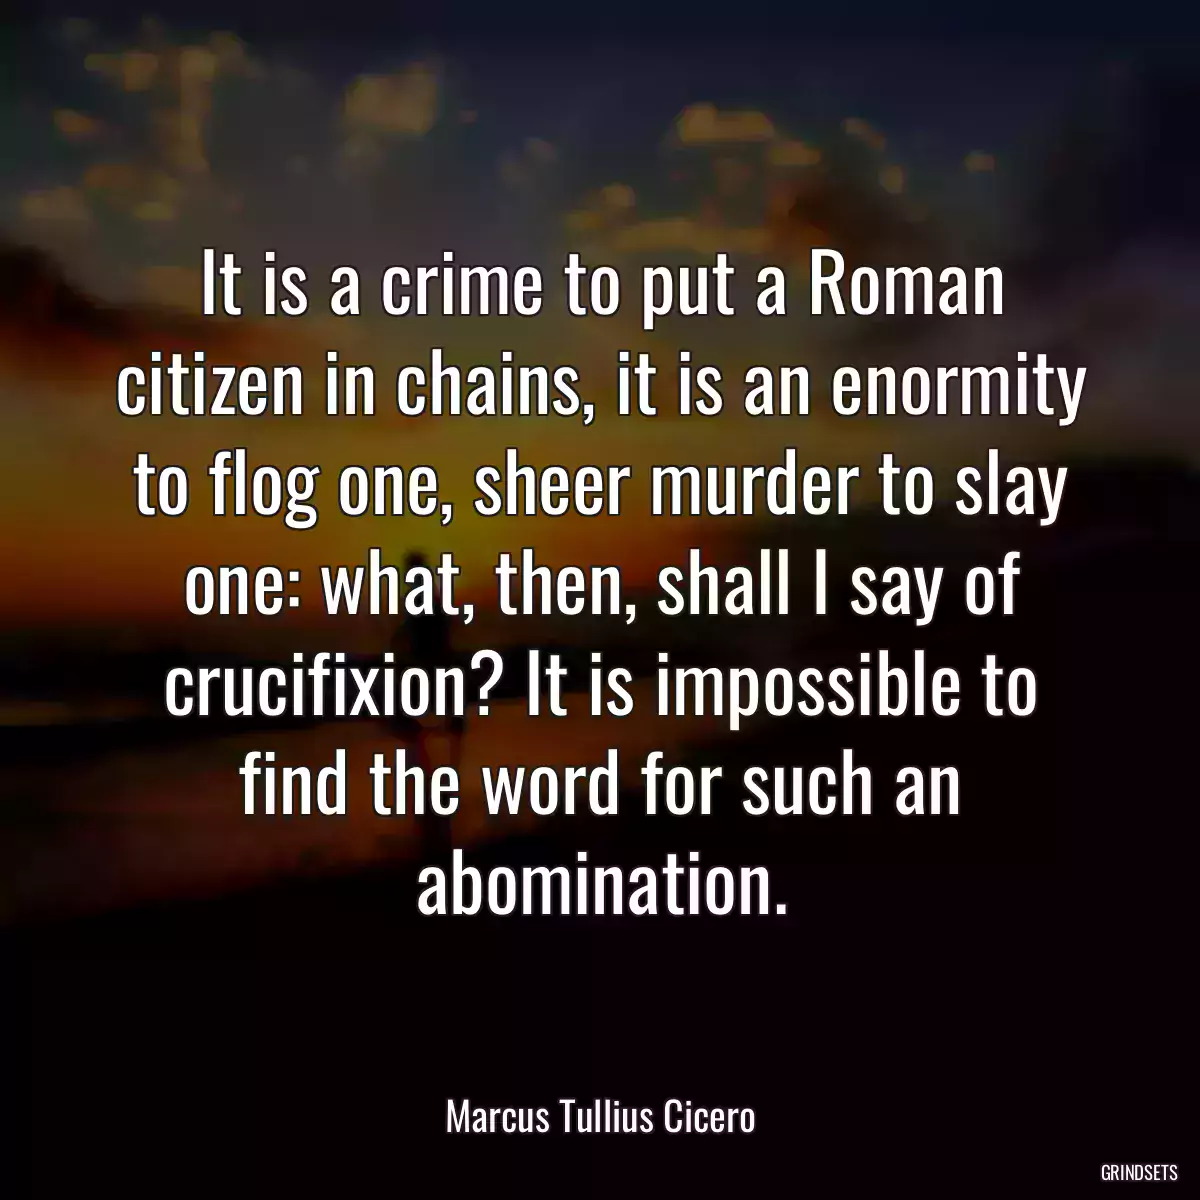 It is a crime to put a Roman citizen in chains, it is an enormity to flog one, sheer murder to slay one: what, then, shall I say of crucifixion? It is impossible to find the word for such an abomination.